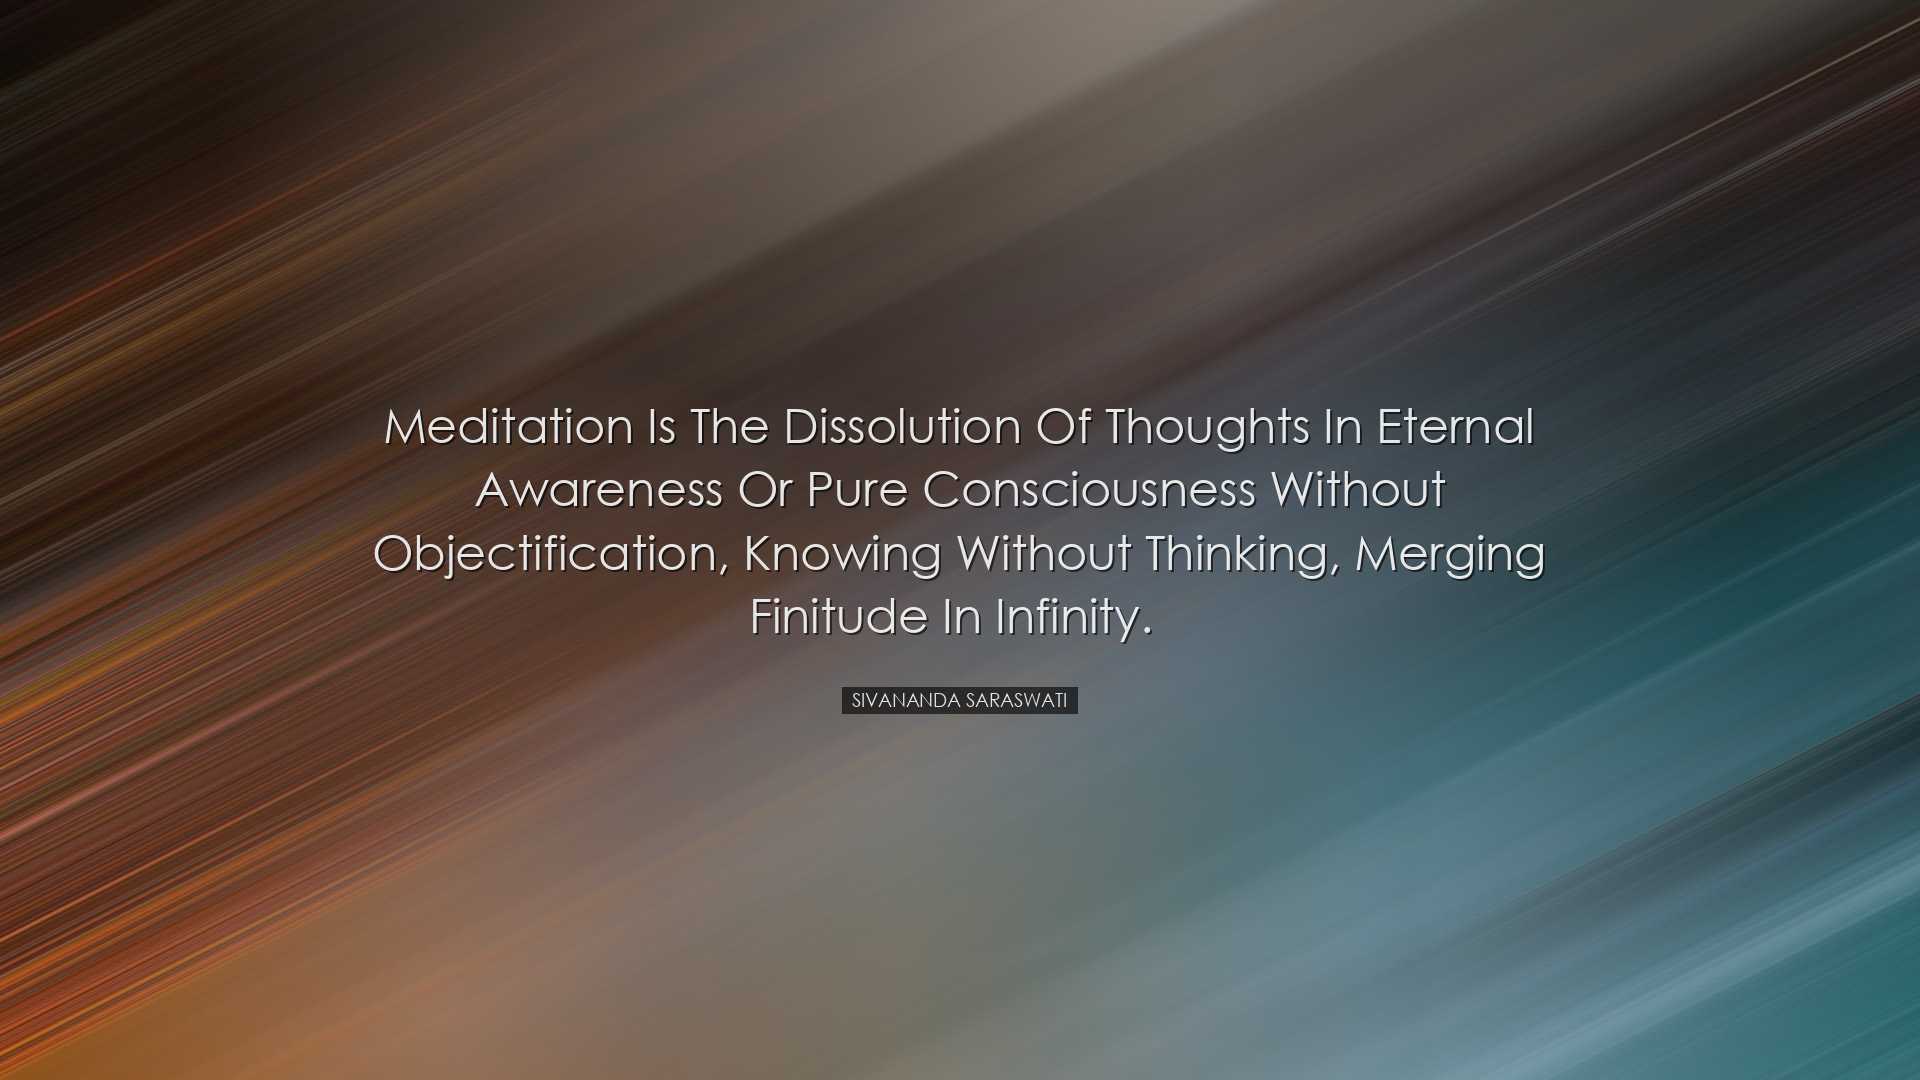 Meditation is the dissolution of thoughts in Eternal awareness or